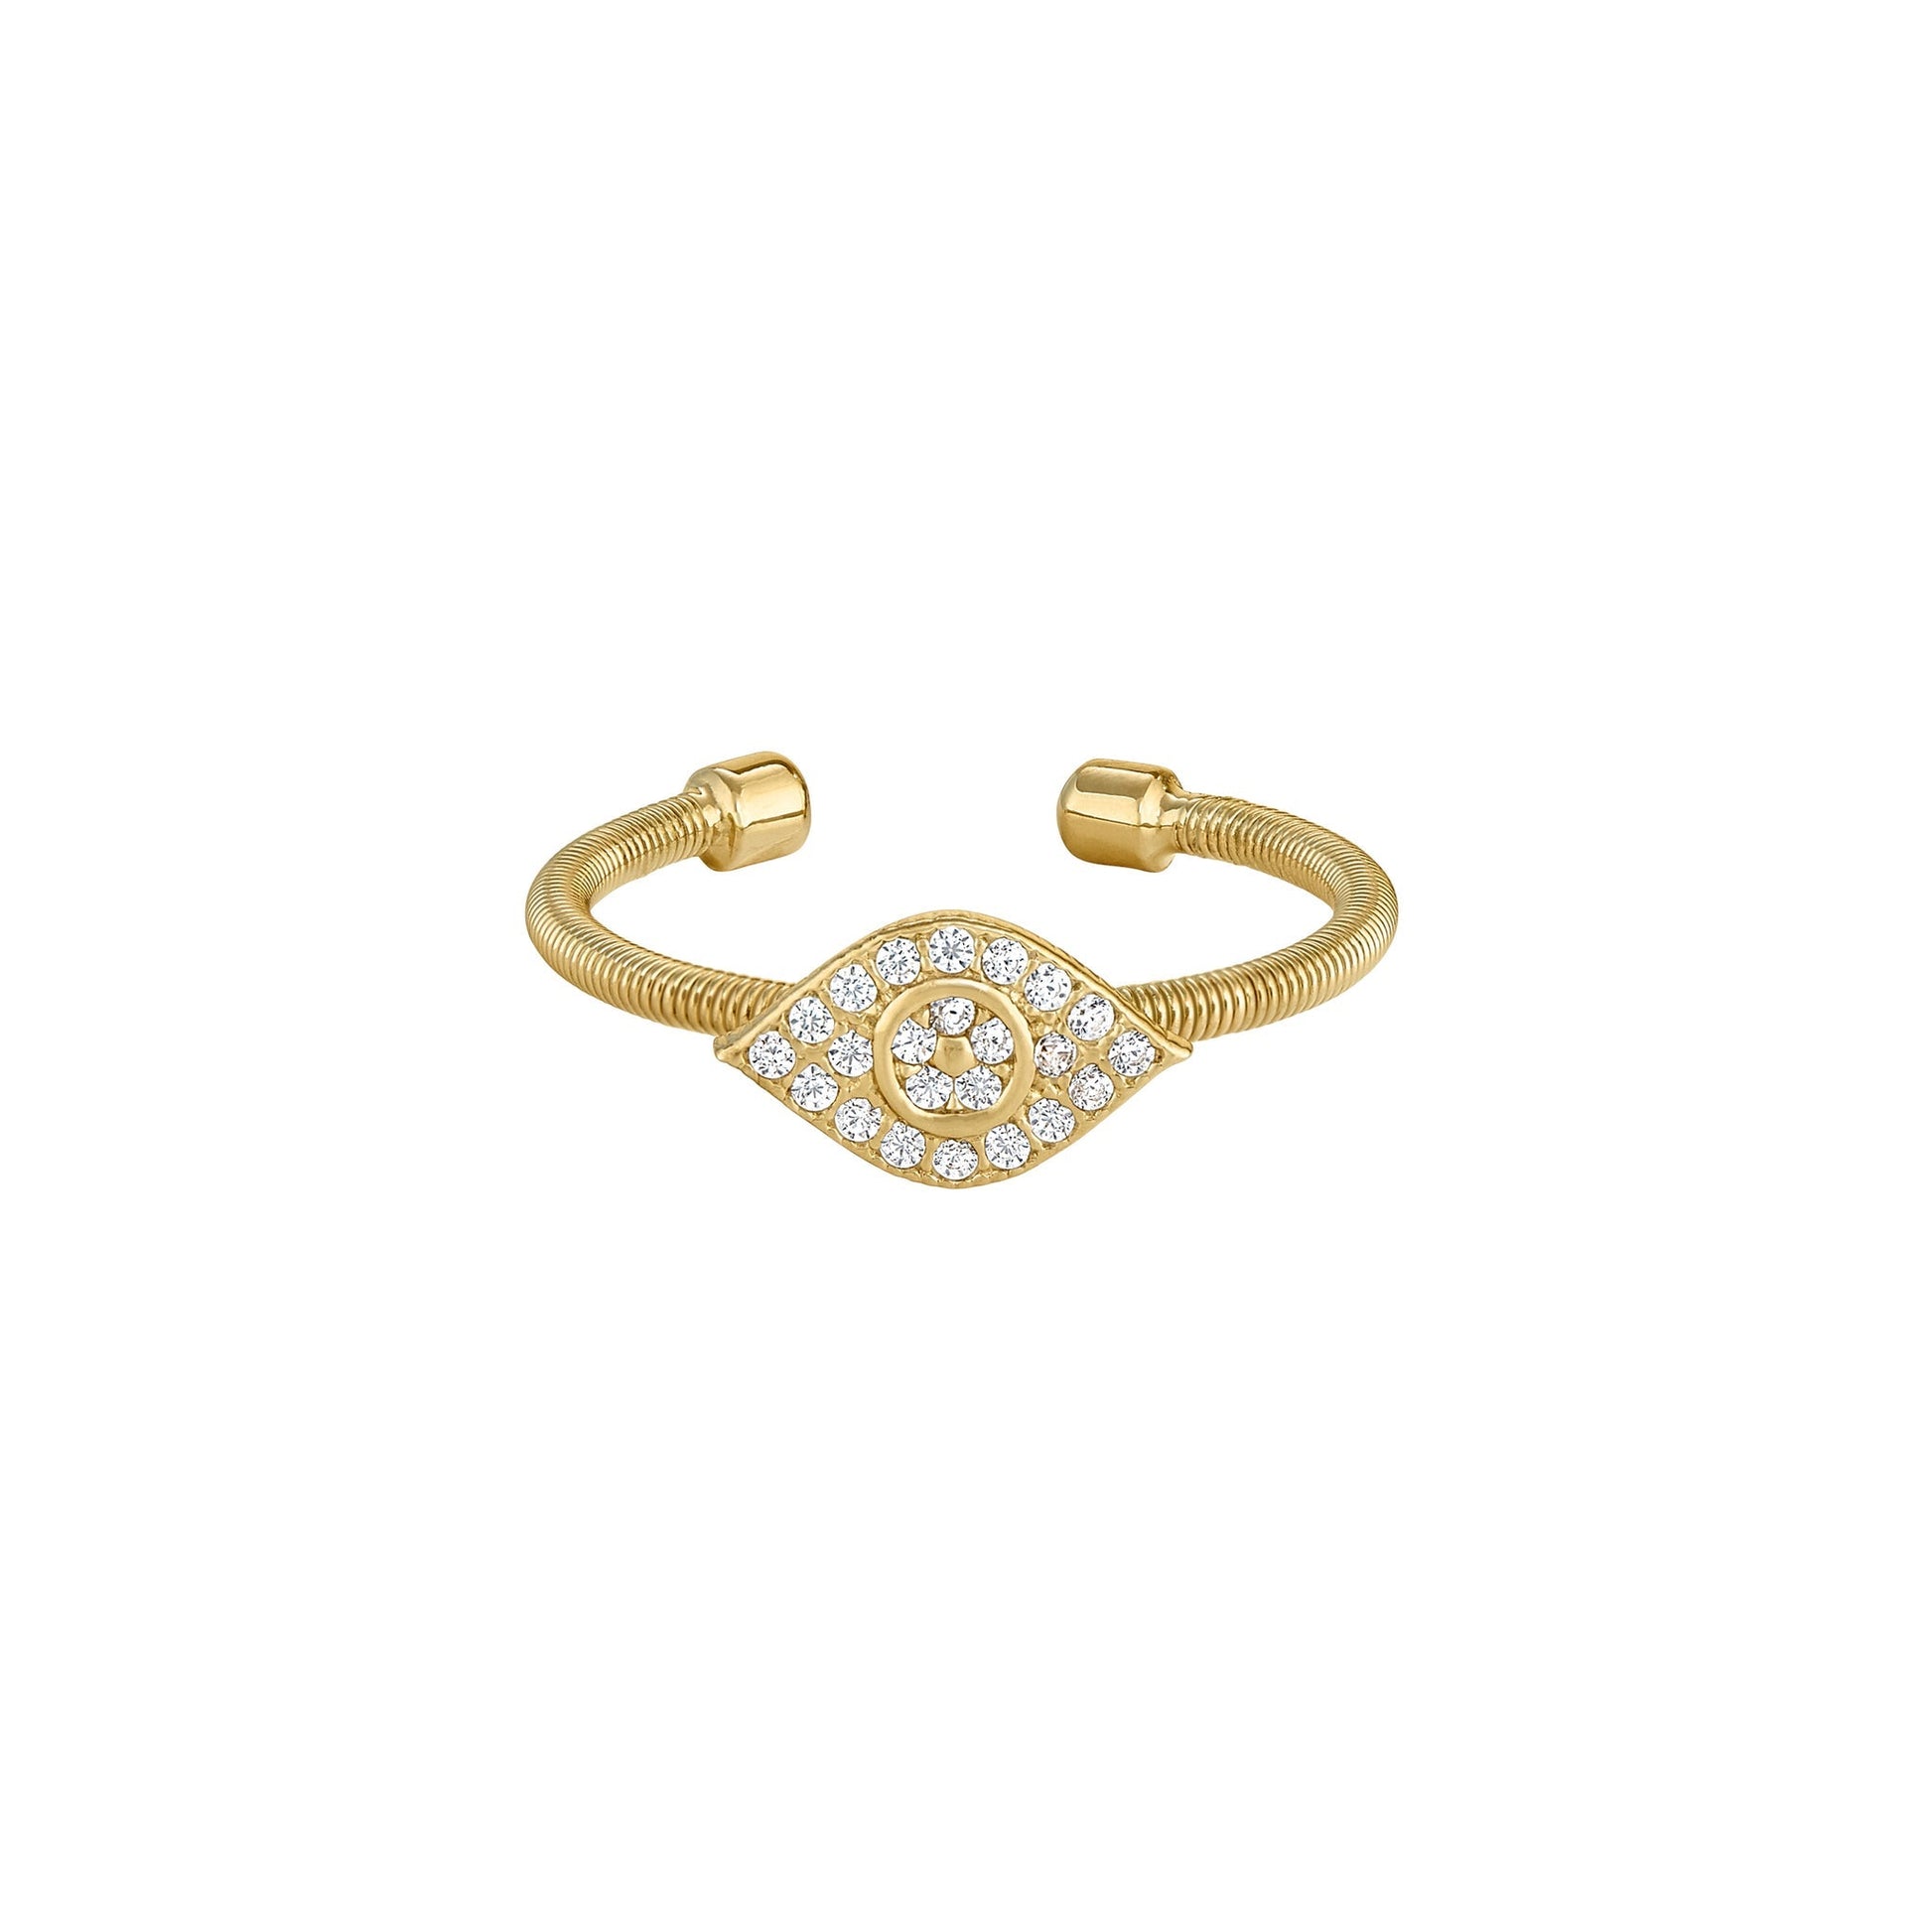 A flexible cable evil eye ring with simulated diamonds displayed on a neutral white background.